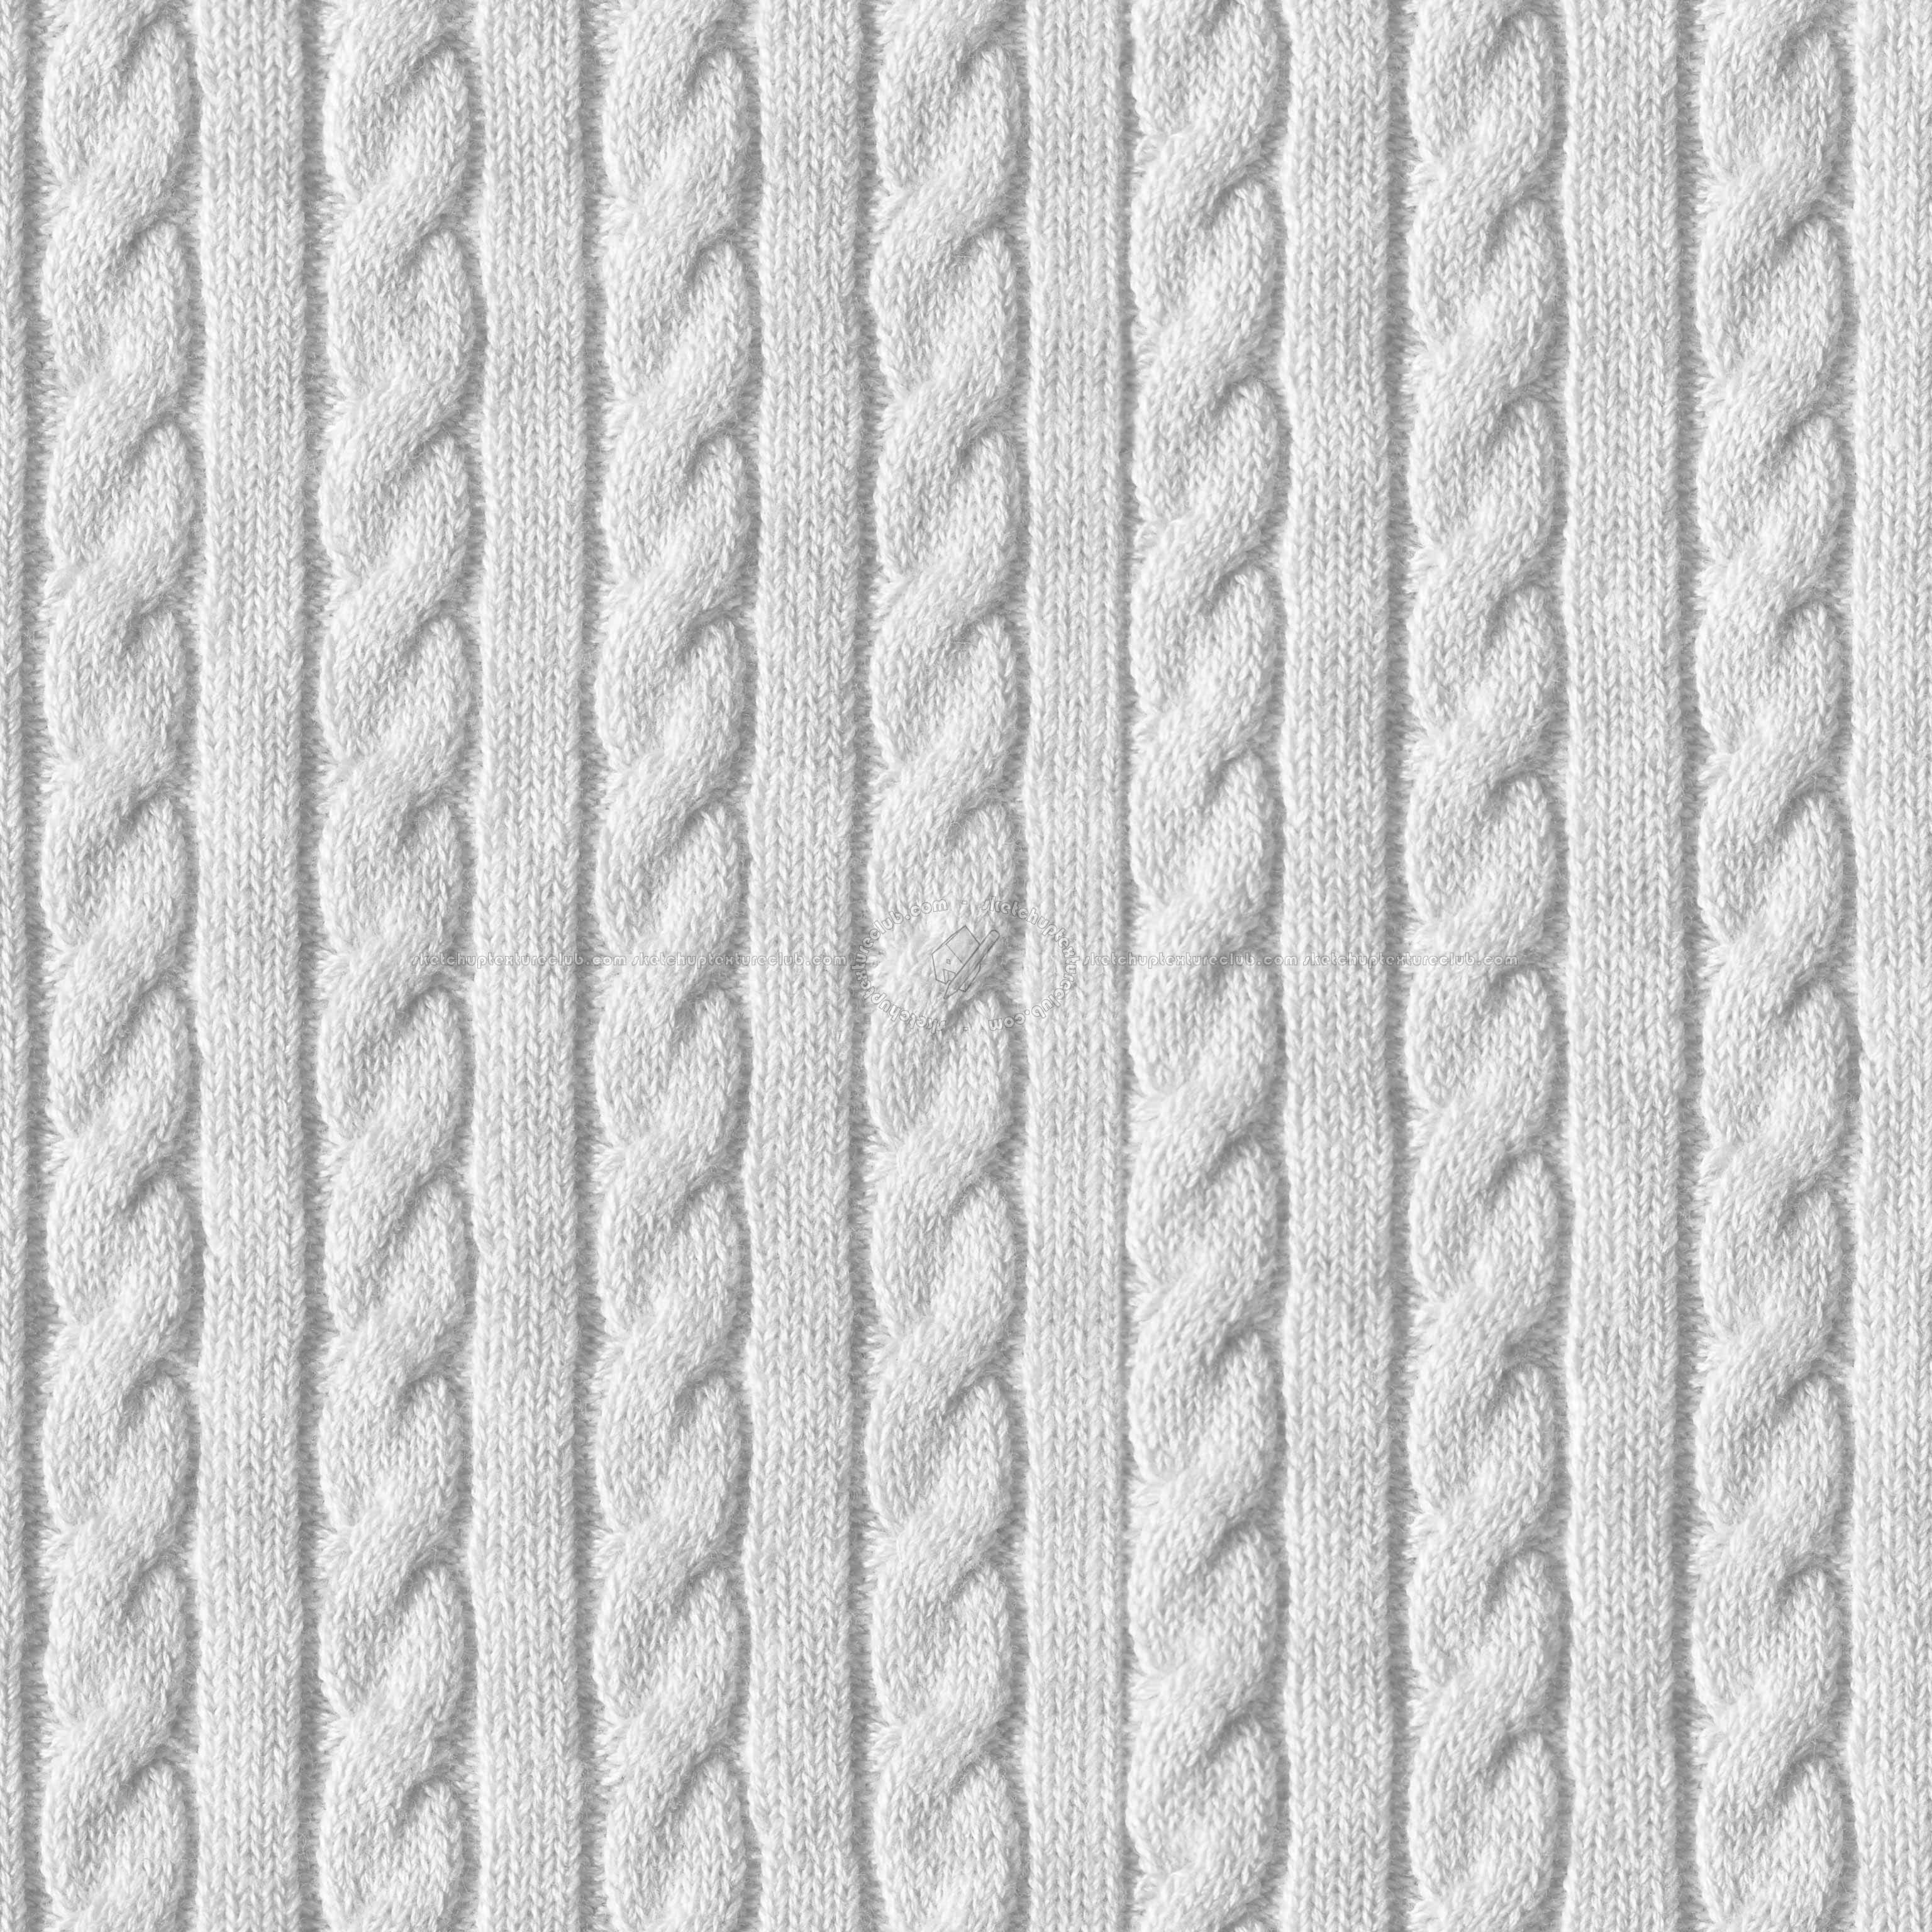 Download Close-up Of A Knitted Wool Texture Wallpaper | Wallpapers.com